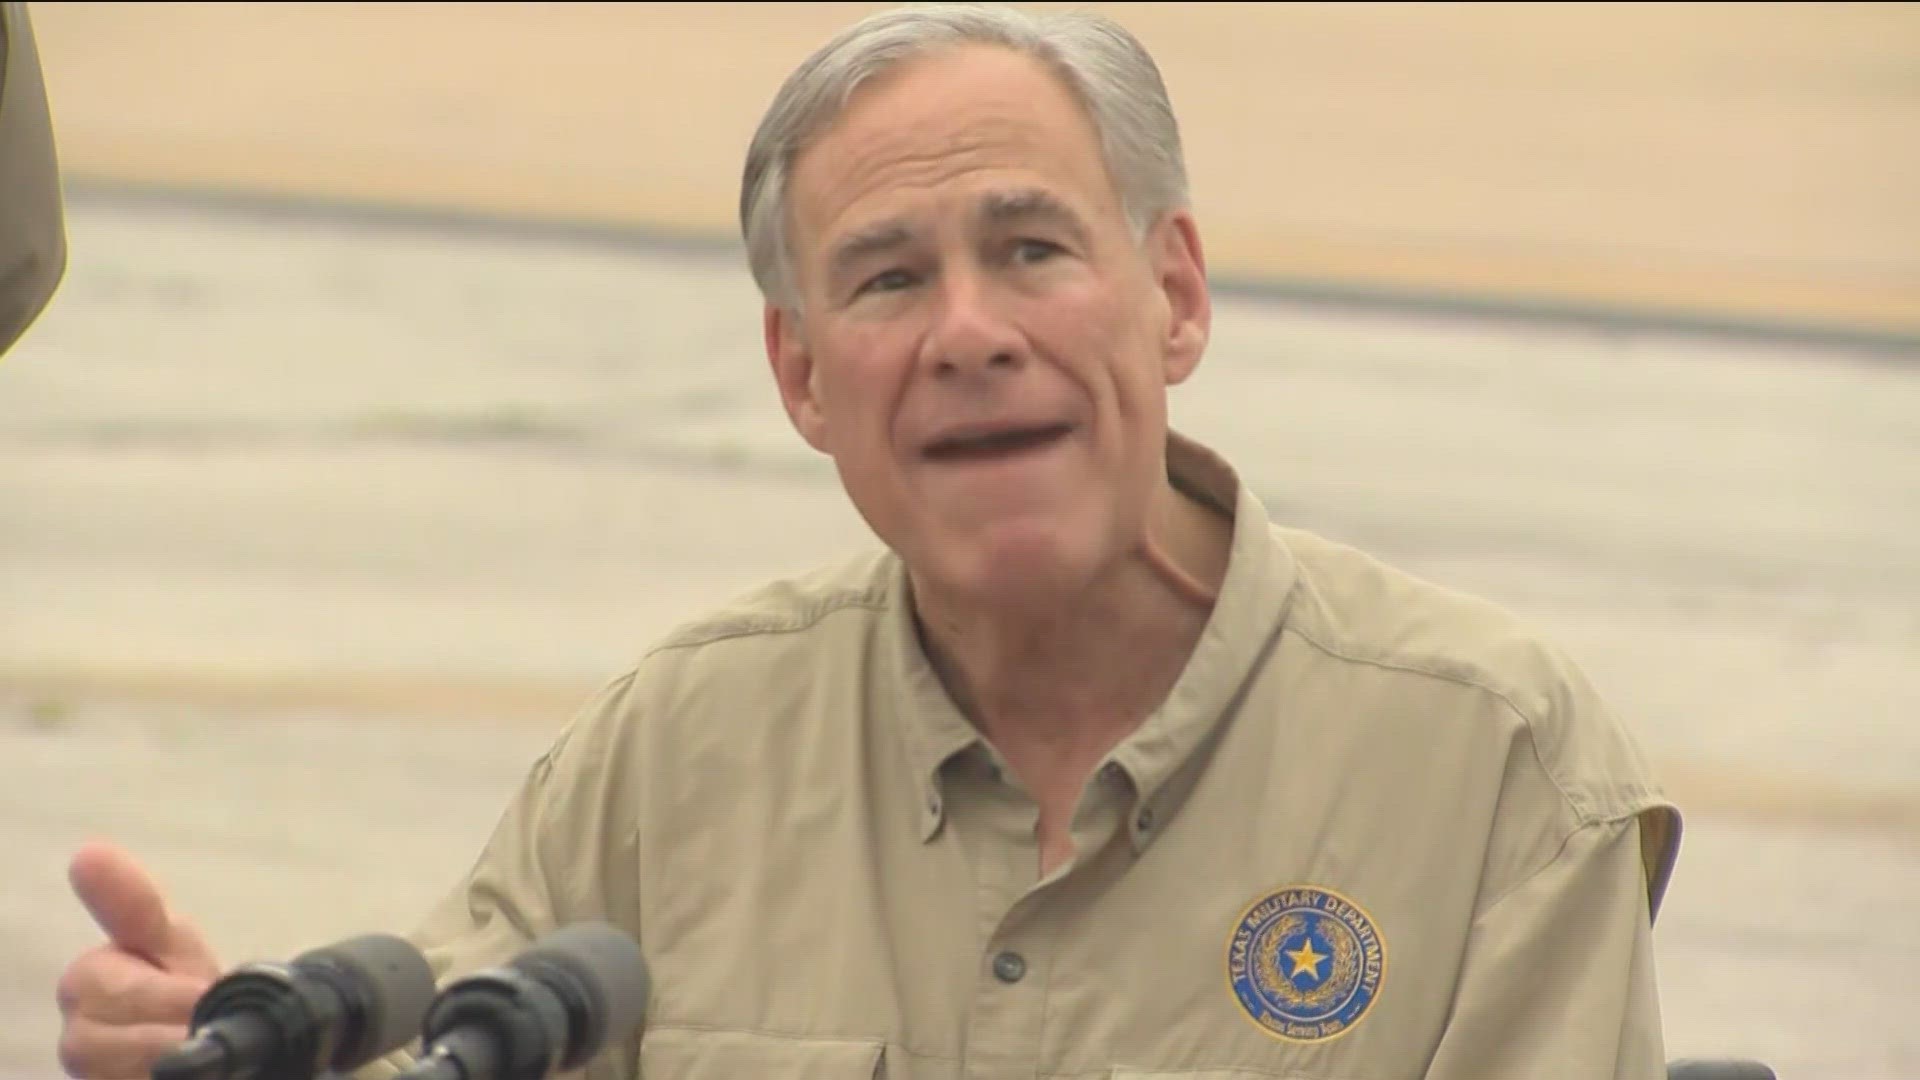 On Friday, Gov. Greg Abbott will provide an update on his efforts to increase patrols at the U.S.-Mexico border.